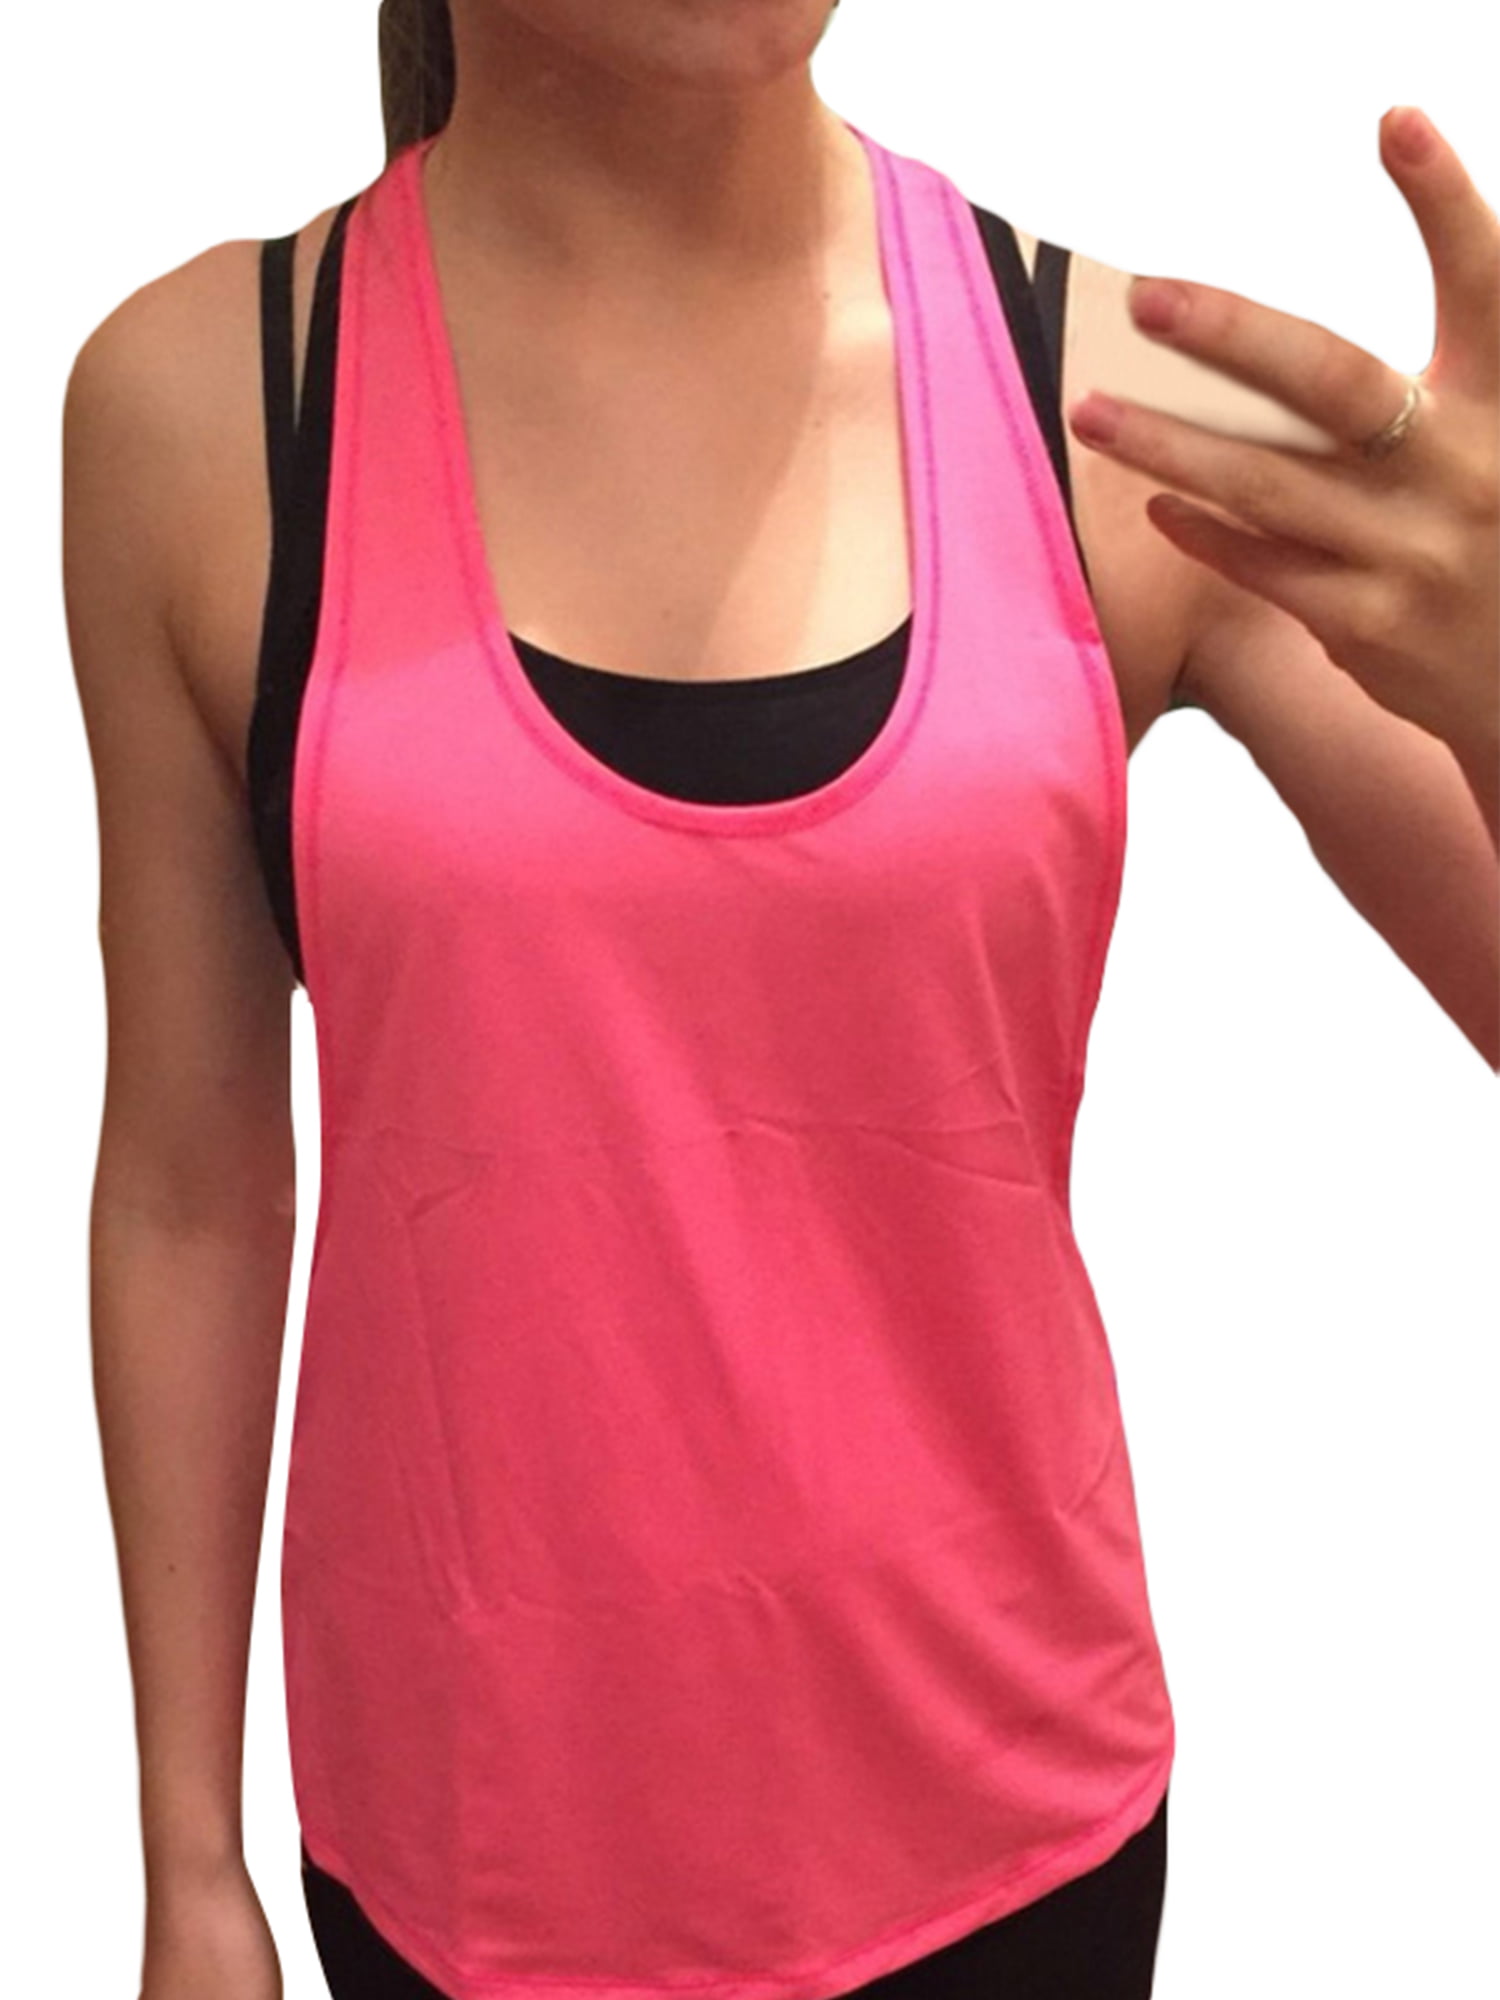 TAIPOVE 3PACKS Women Ladies' Racerback Long Vest Top Tank T Shirt Casual Sleeveless Athletic Activewear Stretch